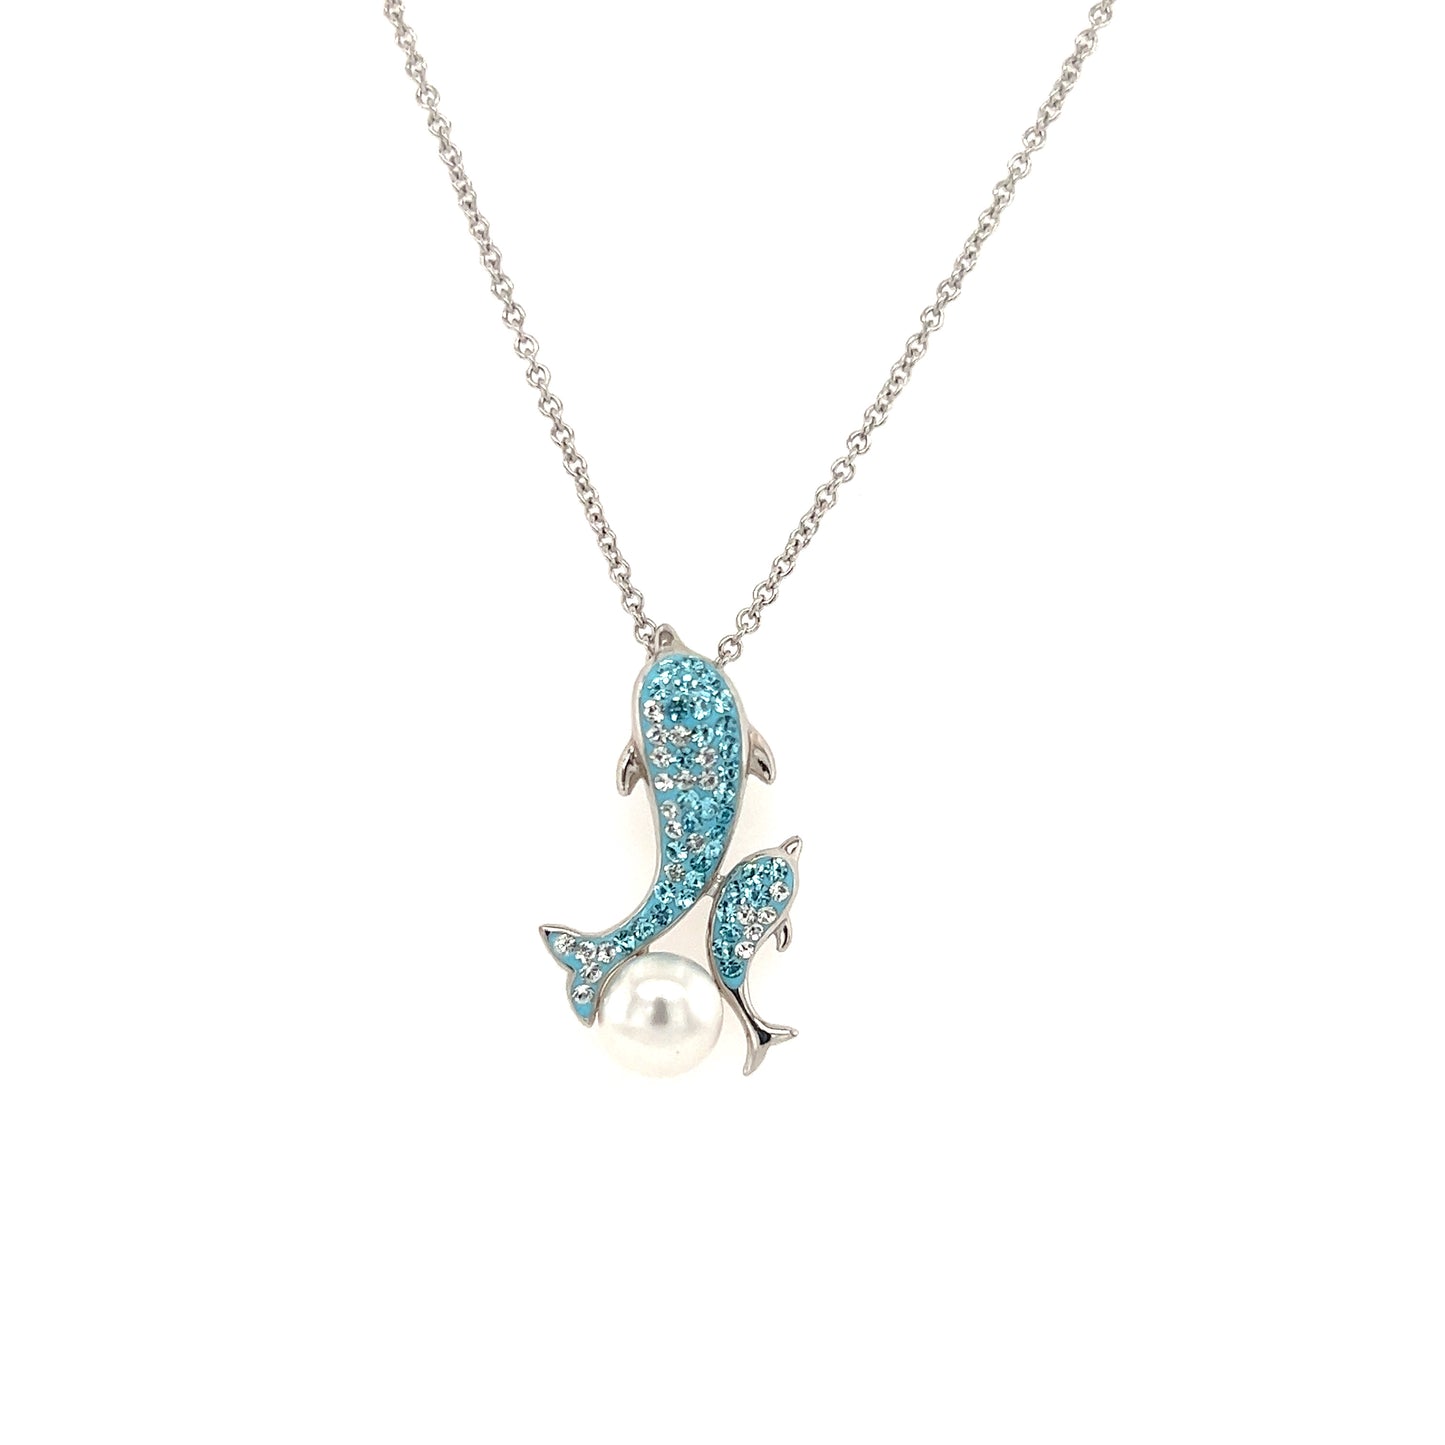 Blue Dolphins Necklace with White Pearl and Crystals in Sterling Silver Front View